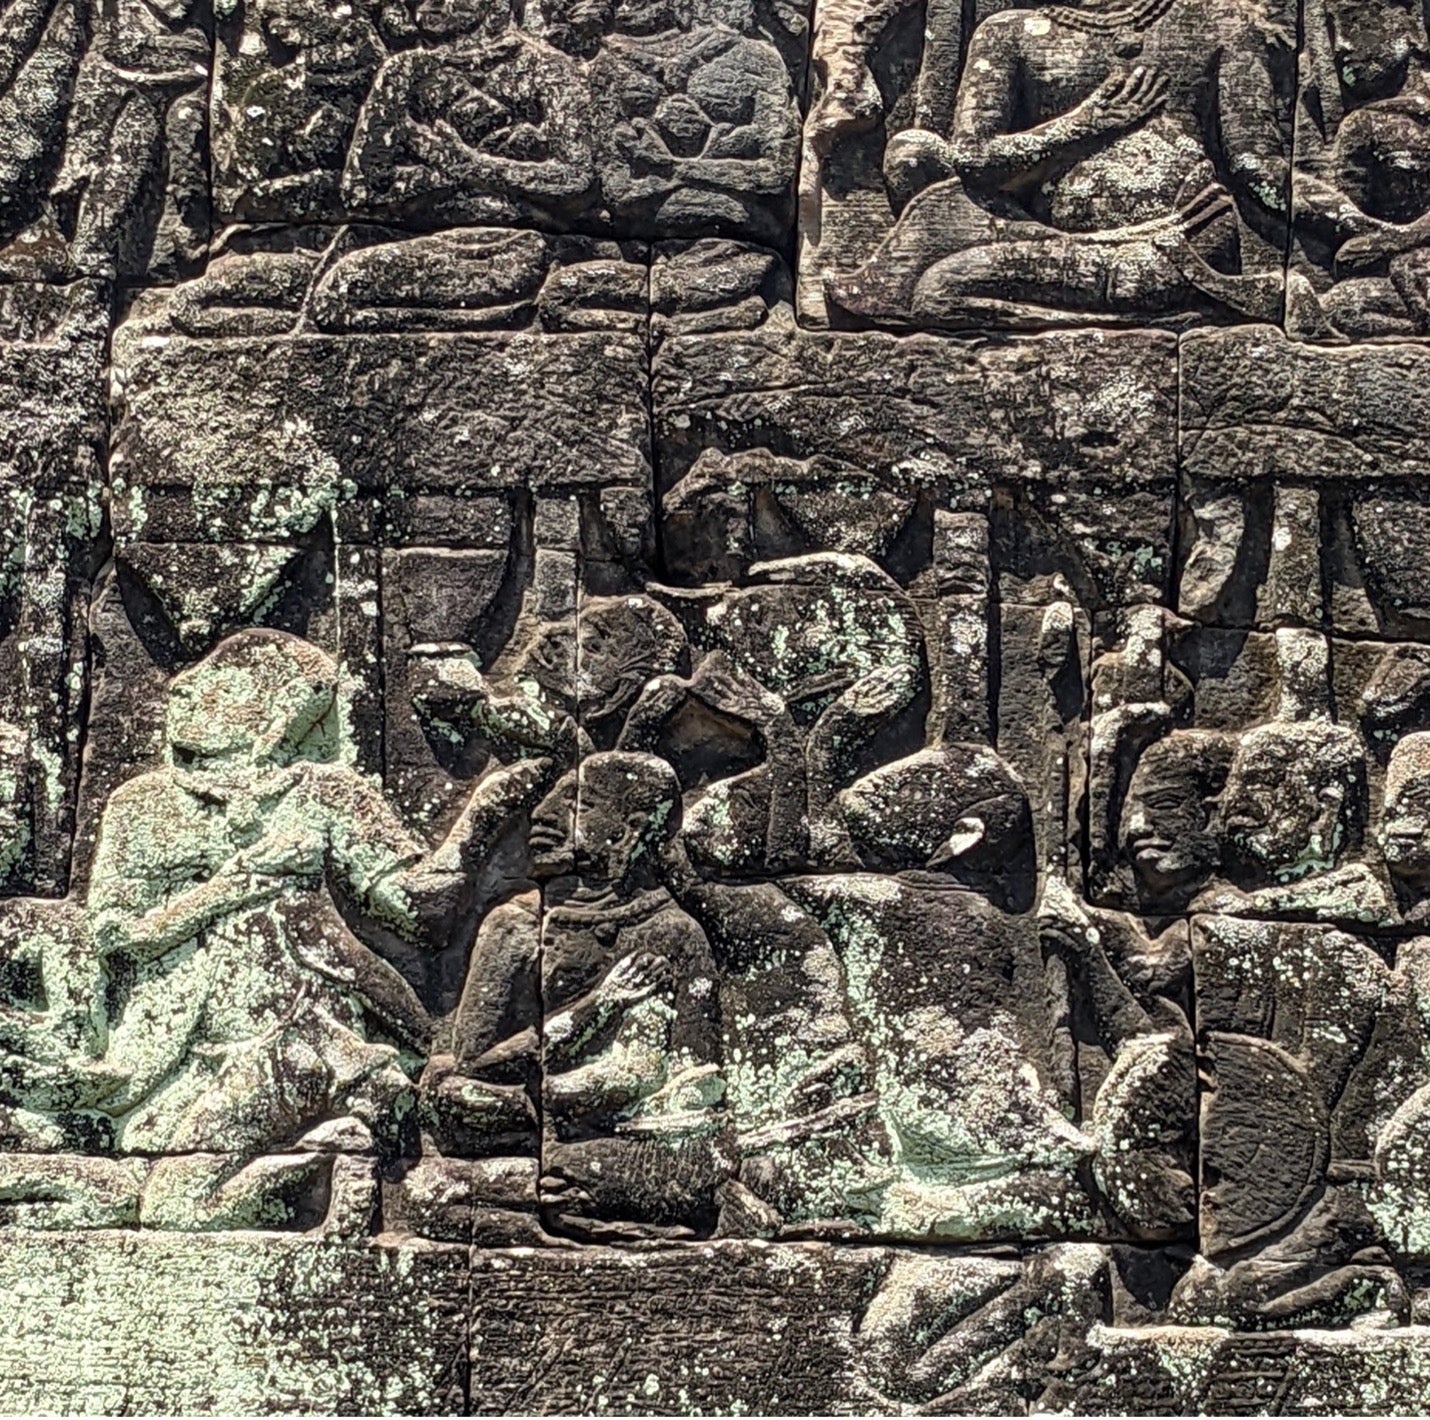 A bas-relief from the Bayon temple depicting the decapitated heads of the rebel leaders from Malyang being presented to King Jayavarman VII